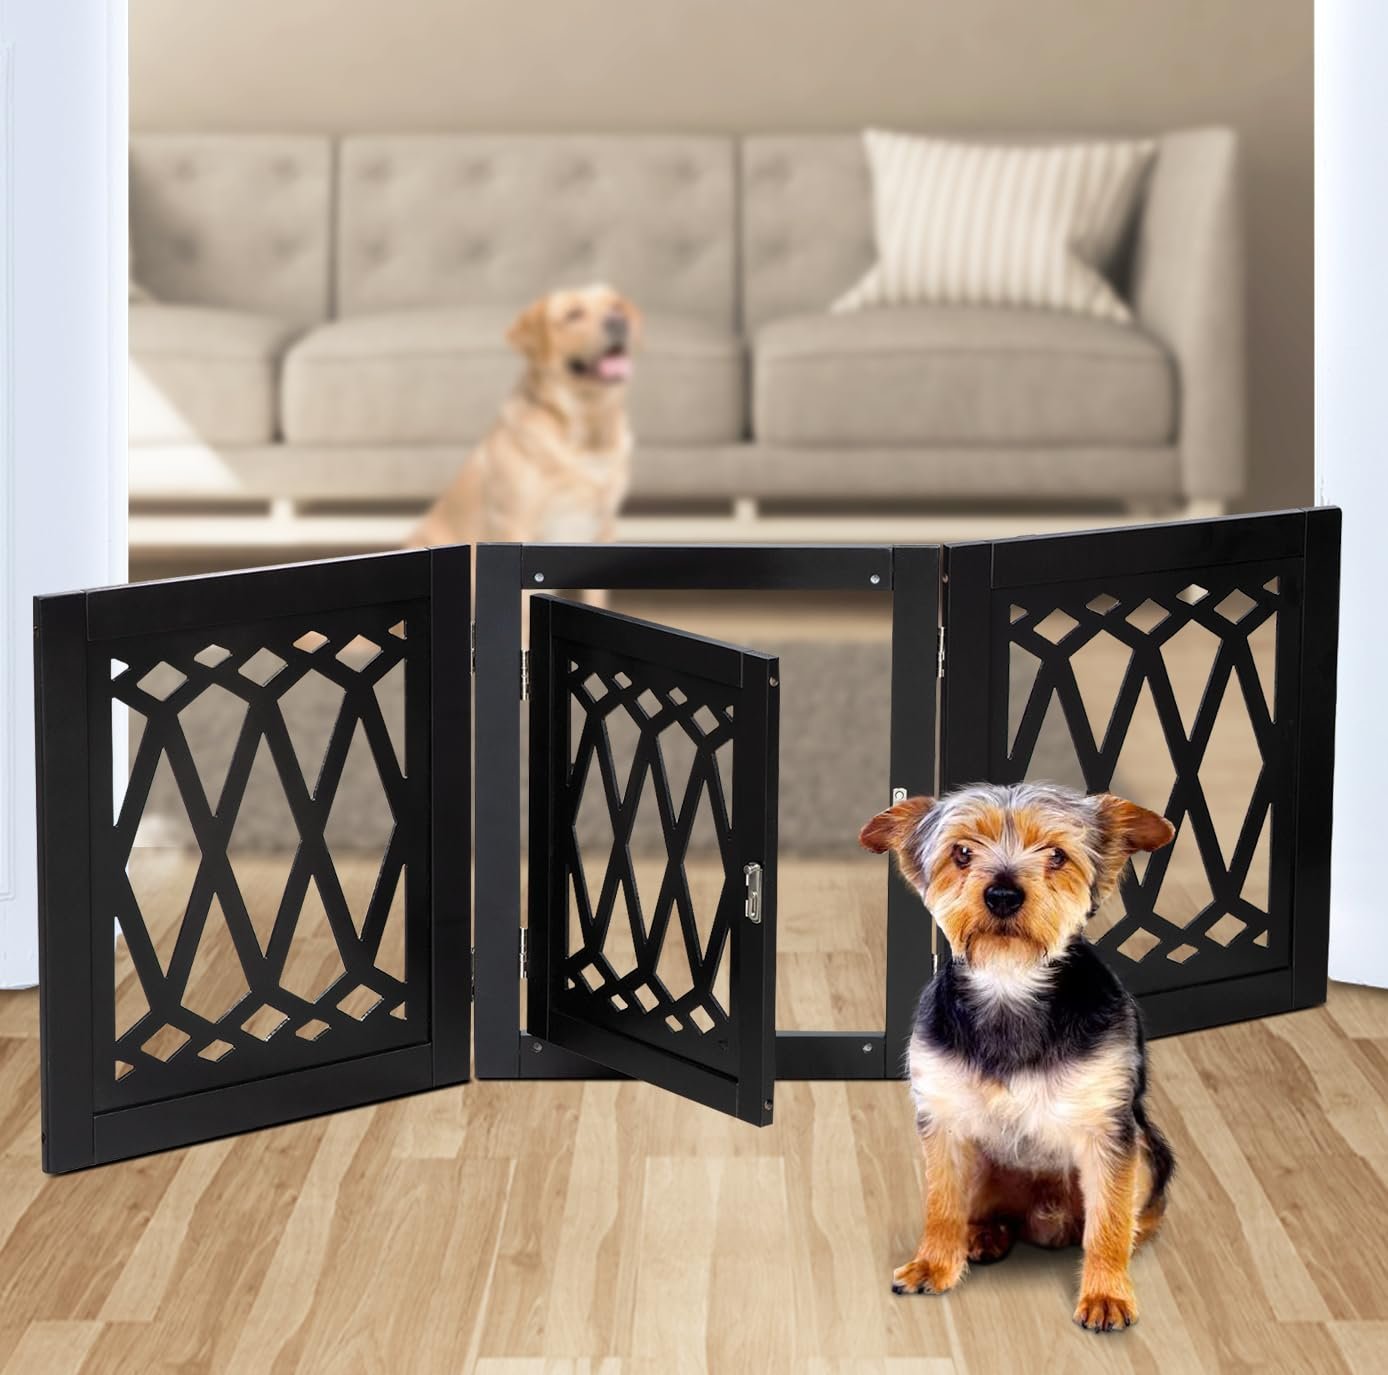 Bundaloo Freestanding Dog Gate with Door Expandable Decorative Wooden Fence for Small to Medium Pet Dogs, Barrier for Stairs, Doorways, & Hallways (Black Diamond)